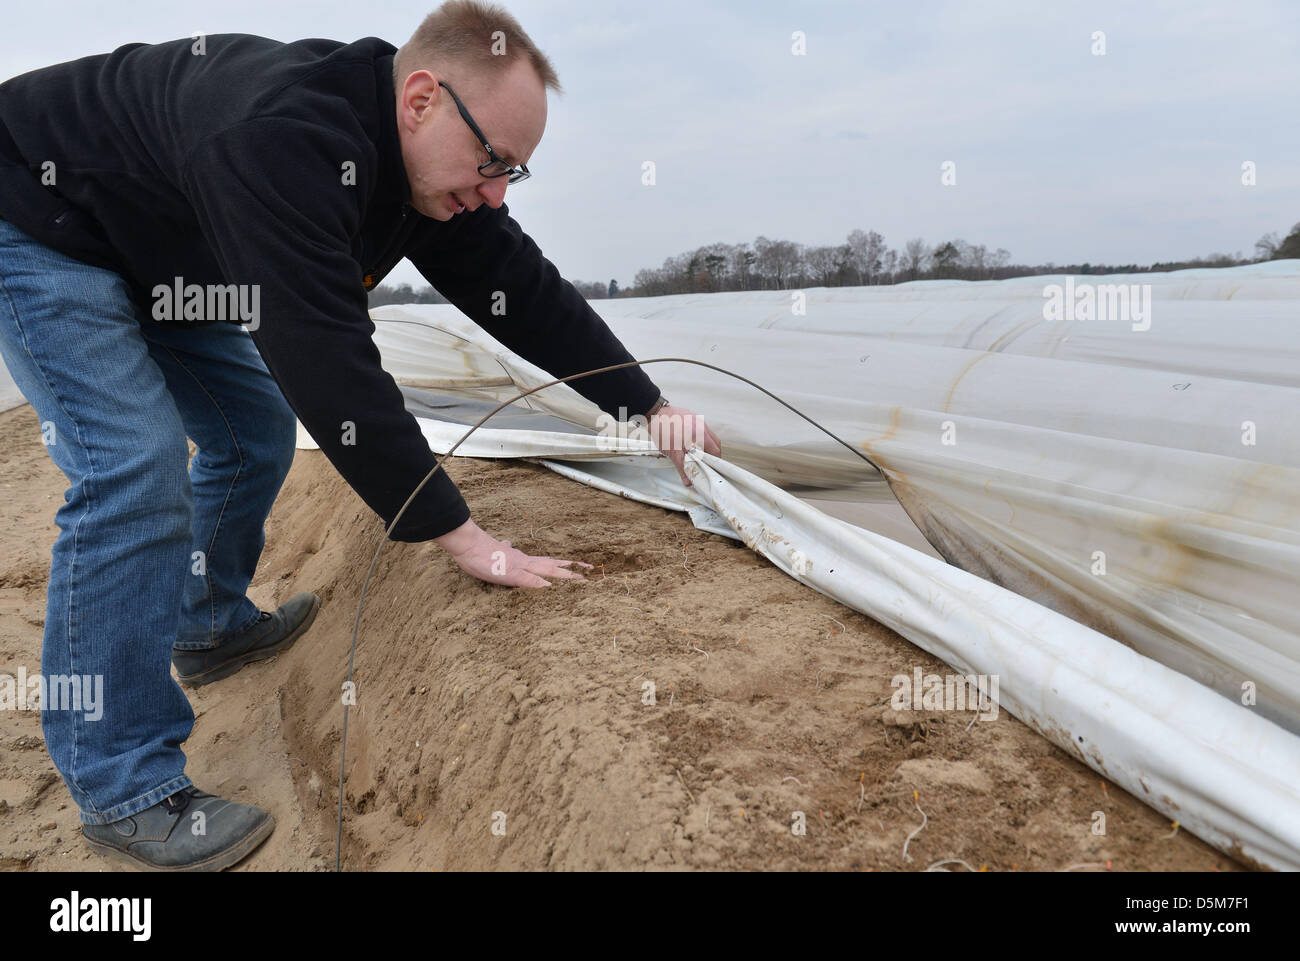 Farmer Thorsten Schloh looks at a row of asparagus under tarp in a field in Hellwege, Germany 04 April 2013. There are no asparagus shoots to be seen at the moment. PHOTO: CARMEN JASPERSEN Stock Photo